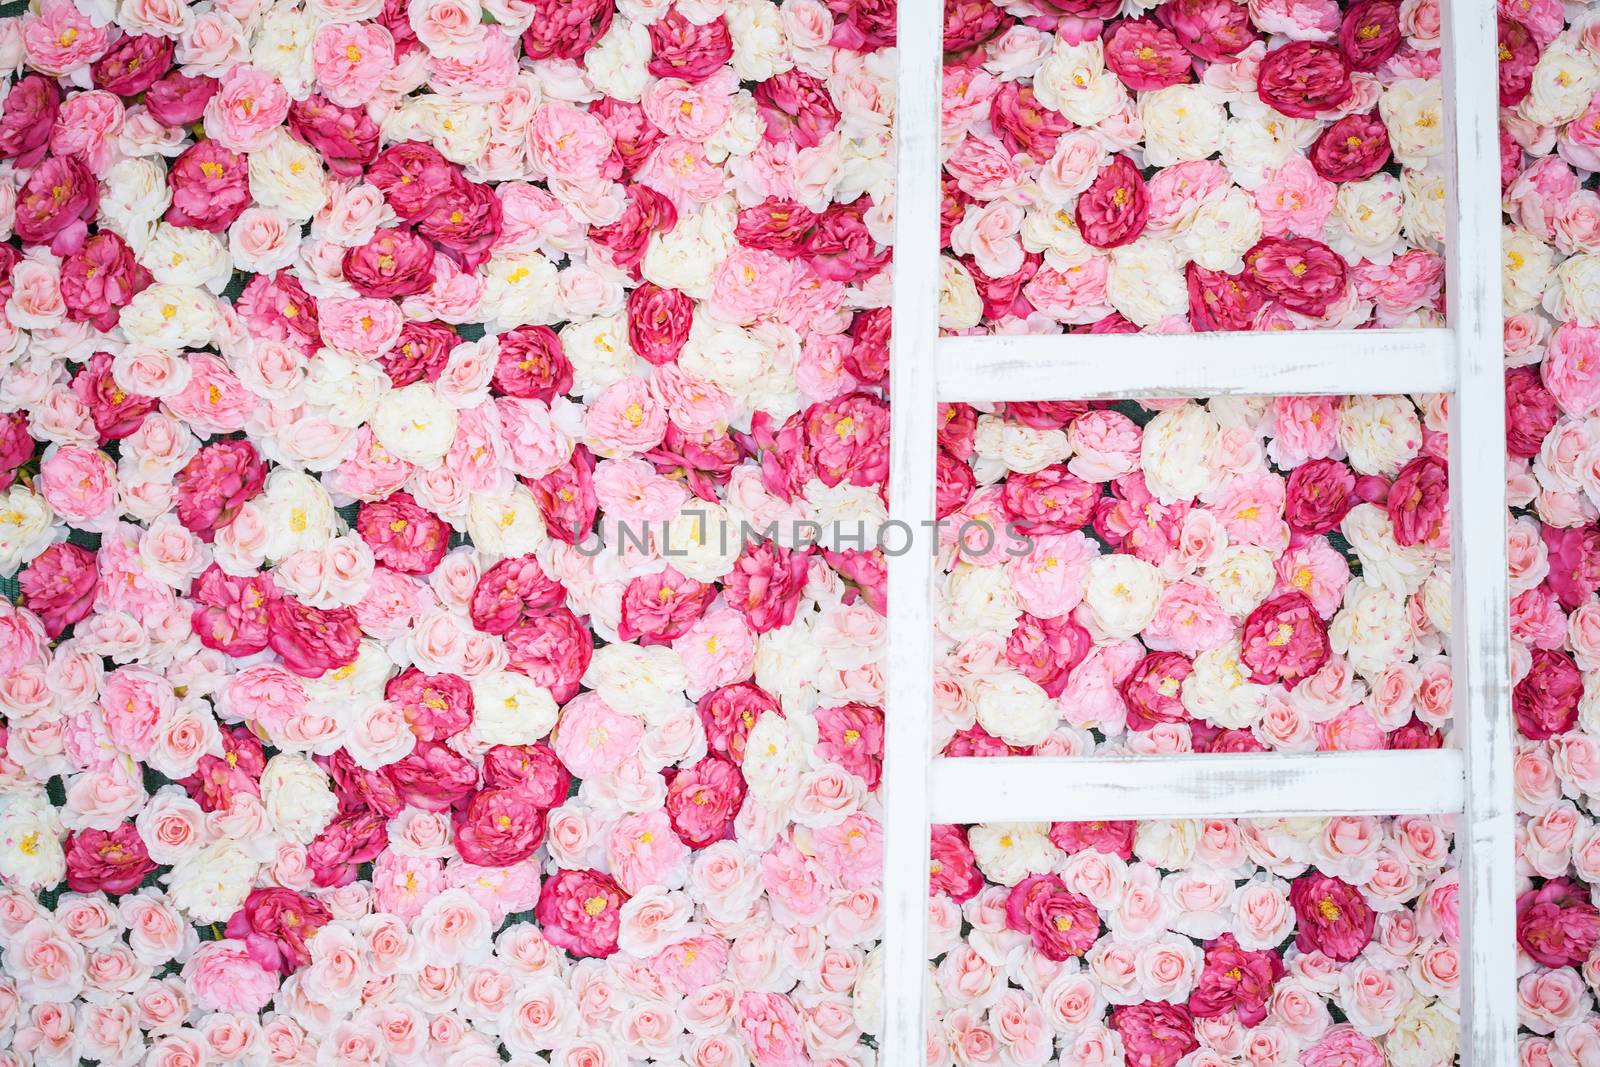 background full of white and pink roses by dolgachov